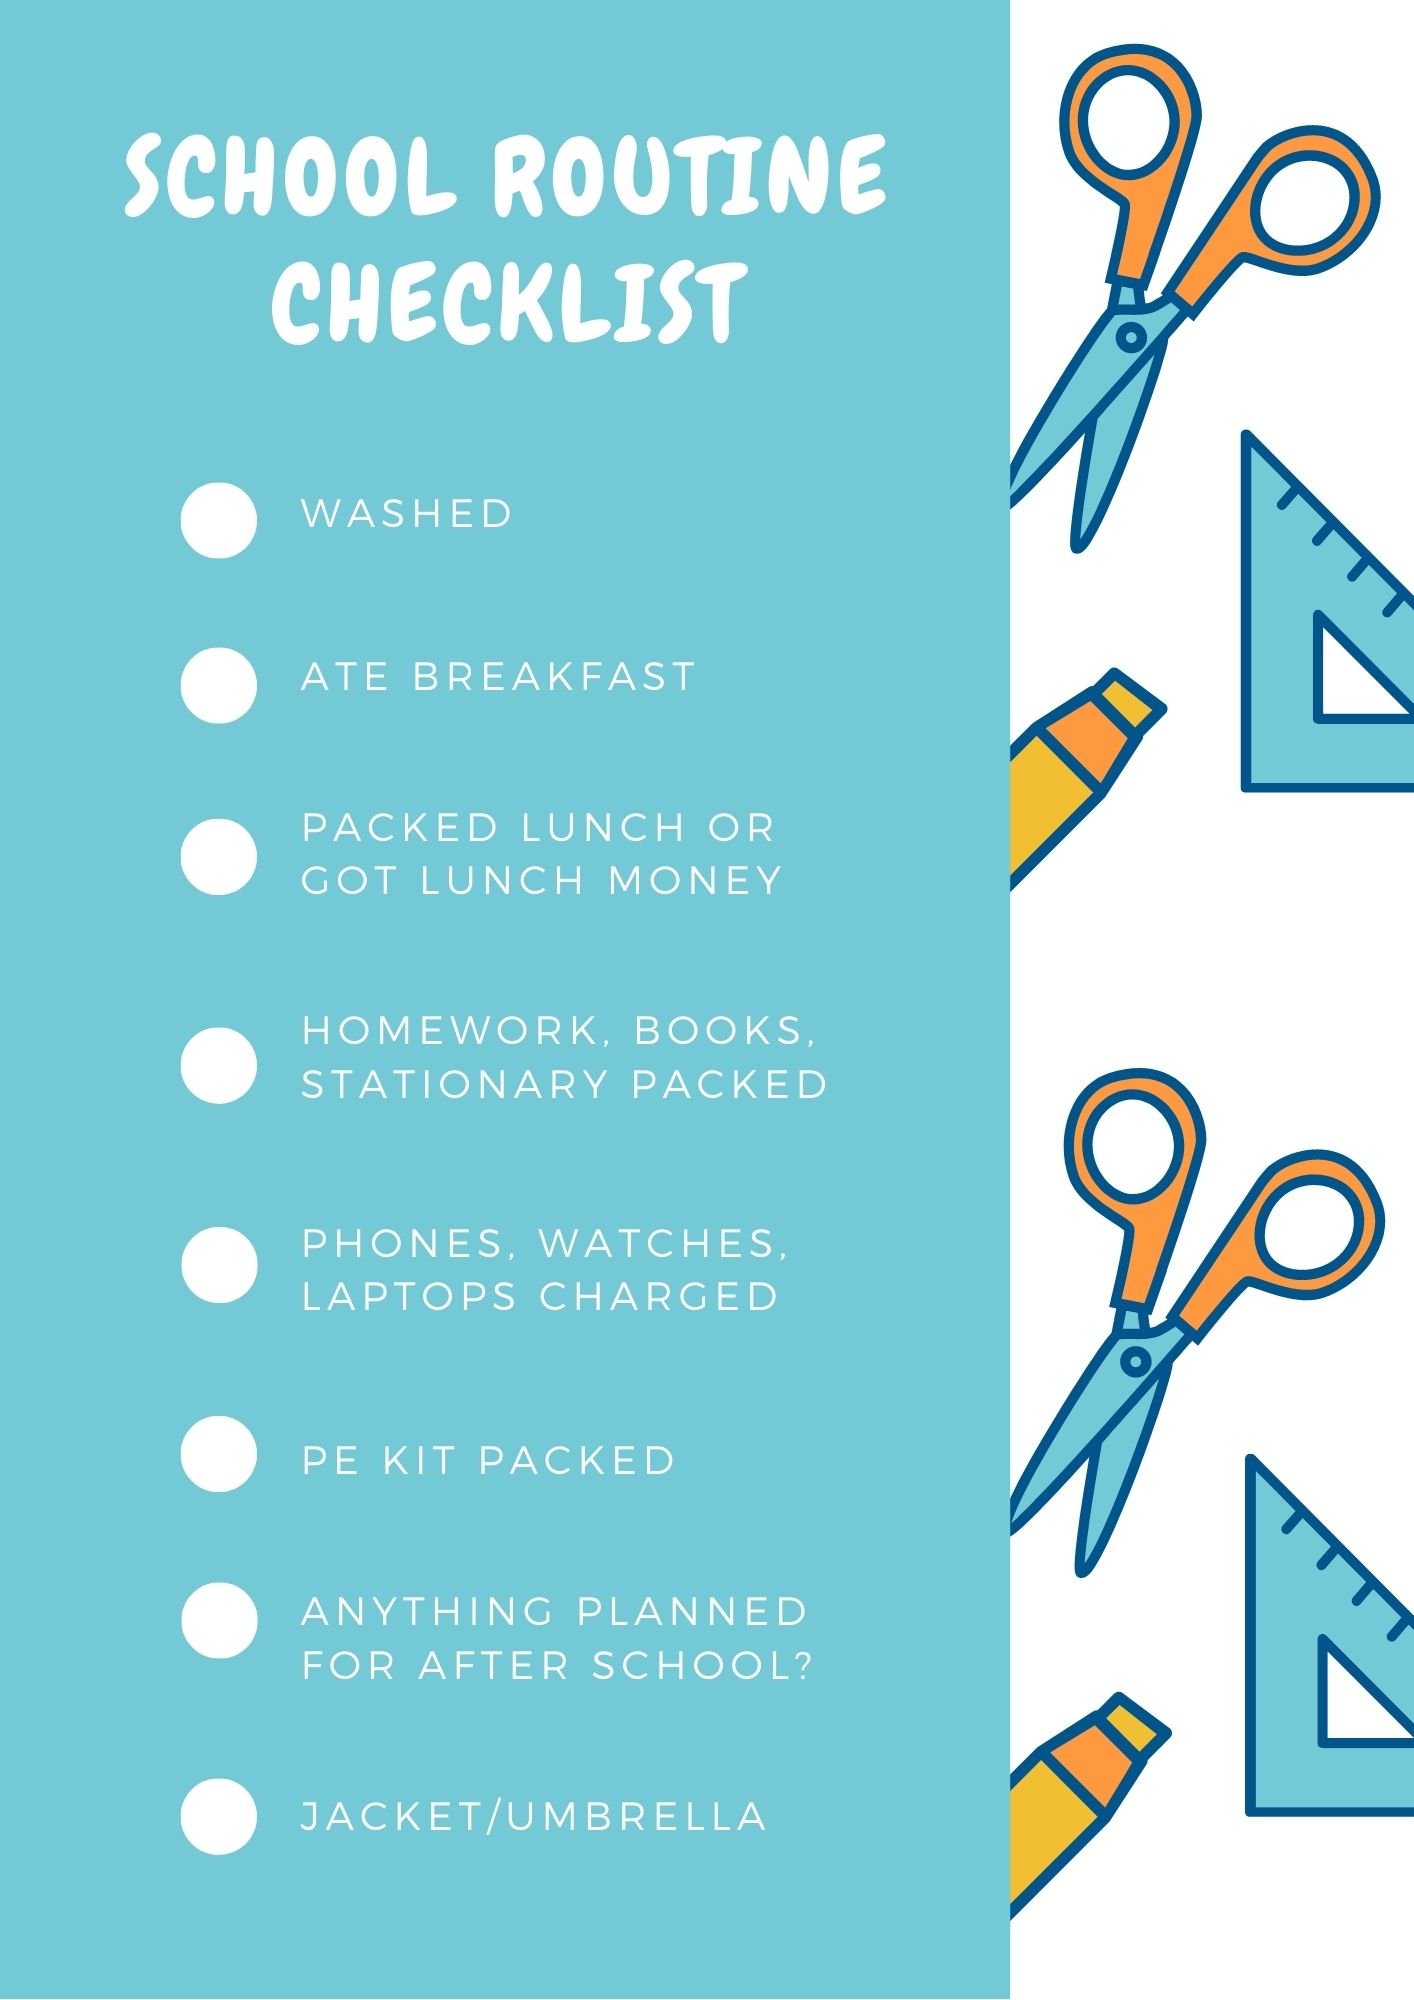 School morning routine printable checklist and chart